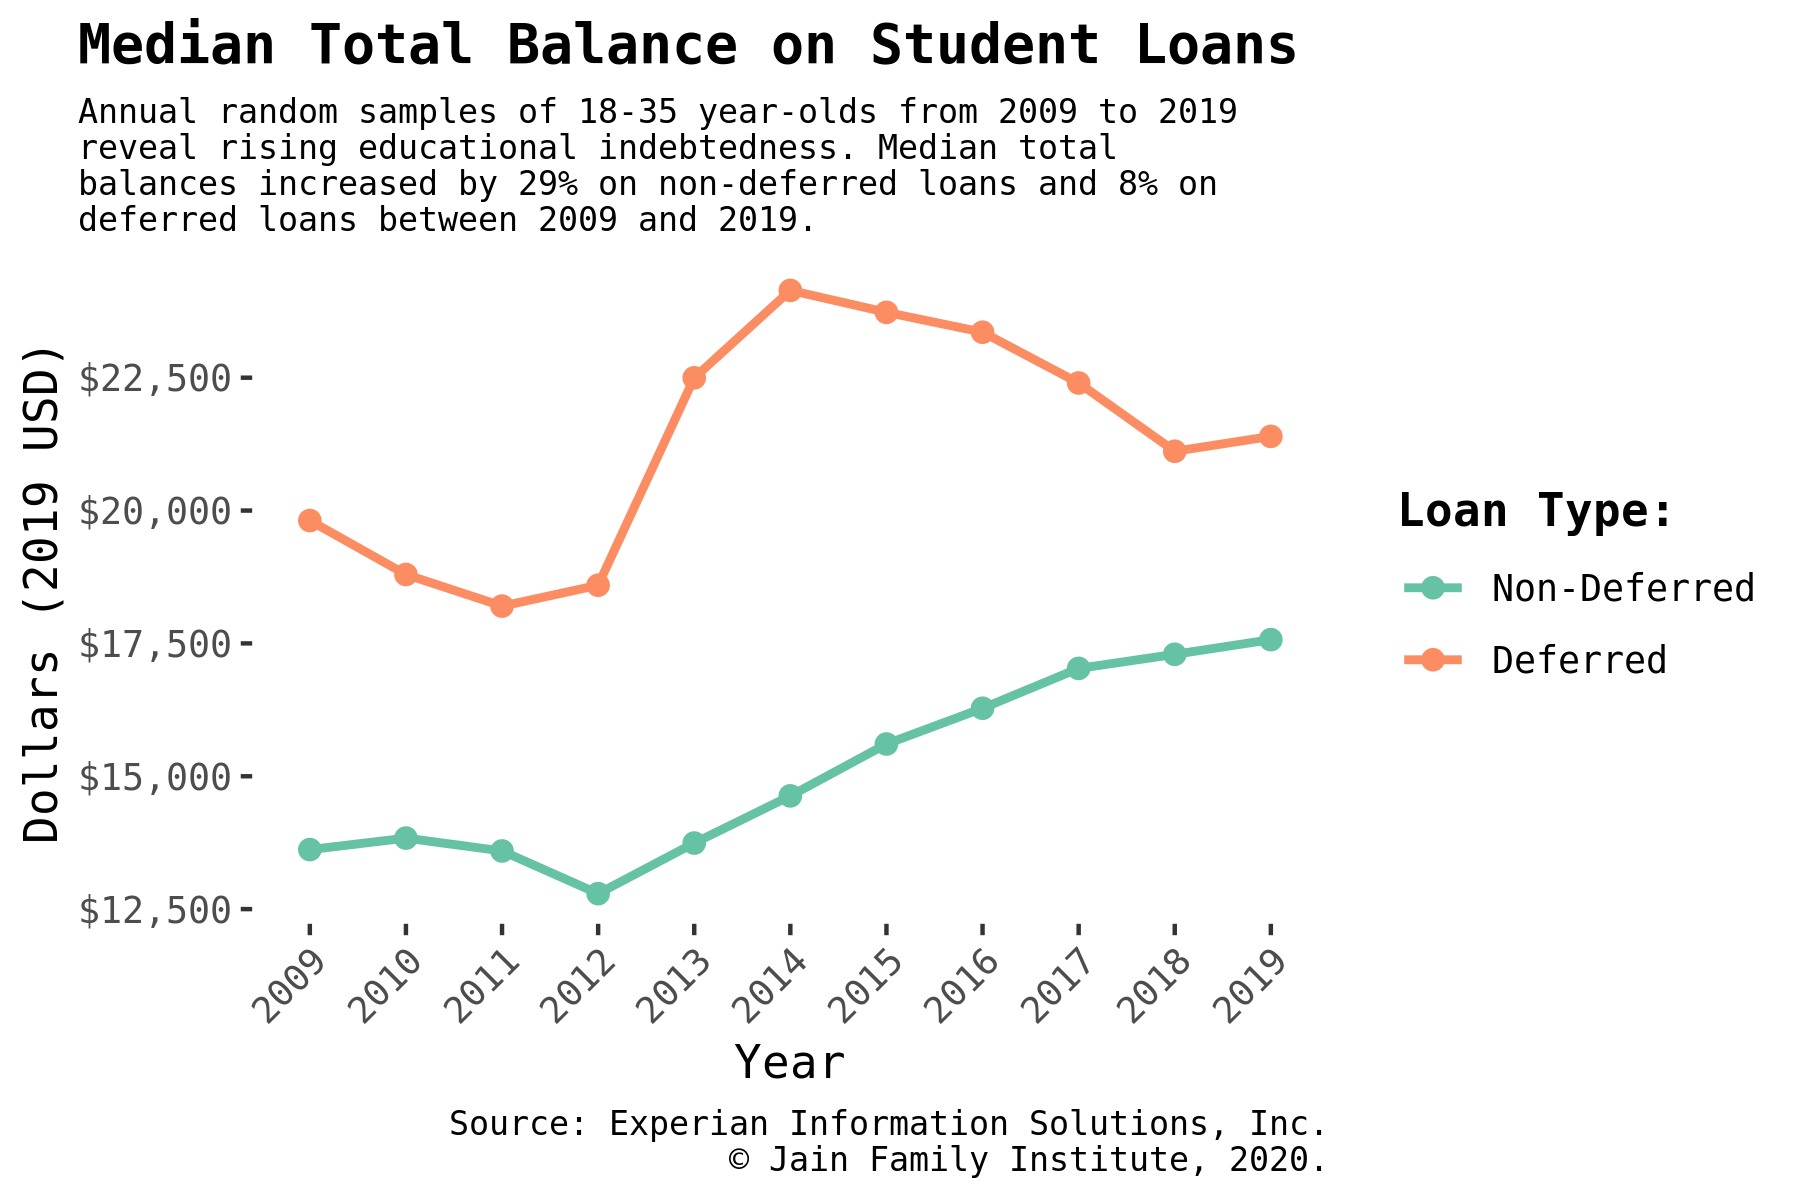 Annual random samples of 18-35 year-olds from 2009 to 2019 reveal rising educational indebtedness. Median total balances increased by 29% on non-deferred loans and 8% on deferred loans between 2009 and 2019.